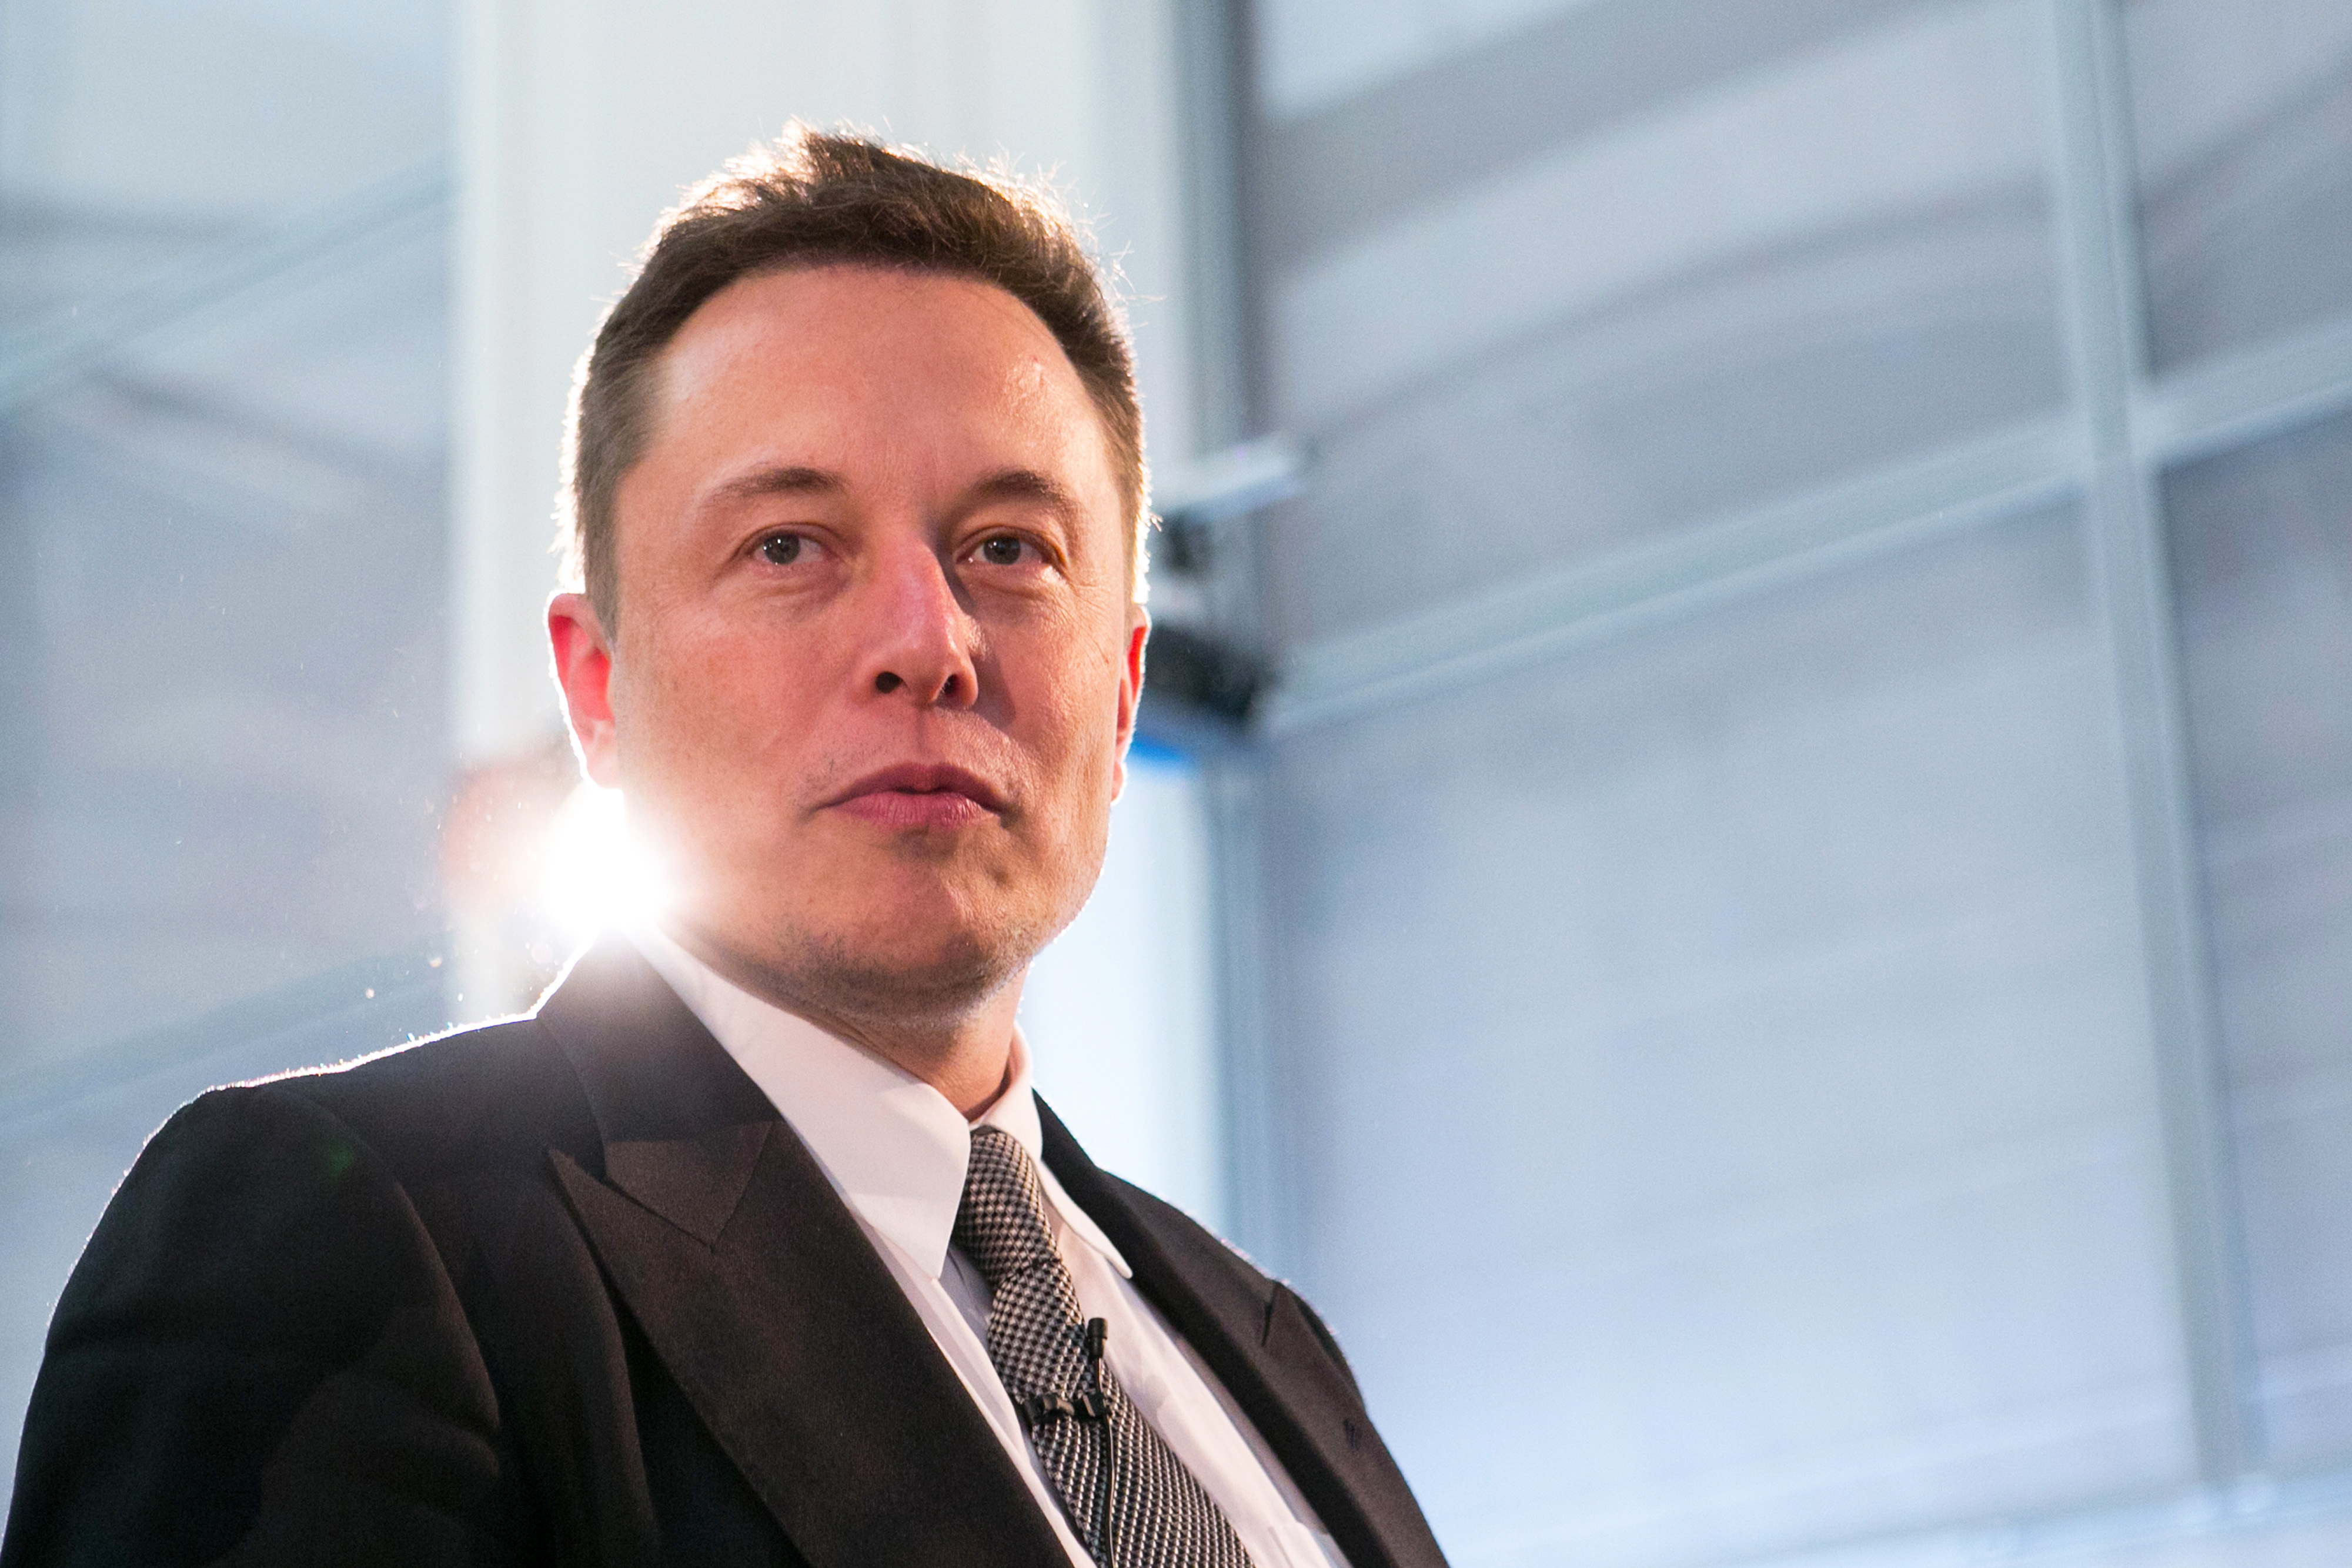 Elon Musk arrives for a news conference in Berlin, on Sept. 24, 2015. (Krisztian Bocsi—Bloomberg/Getty Images)